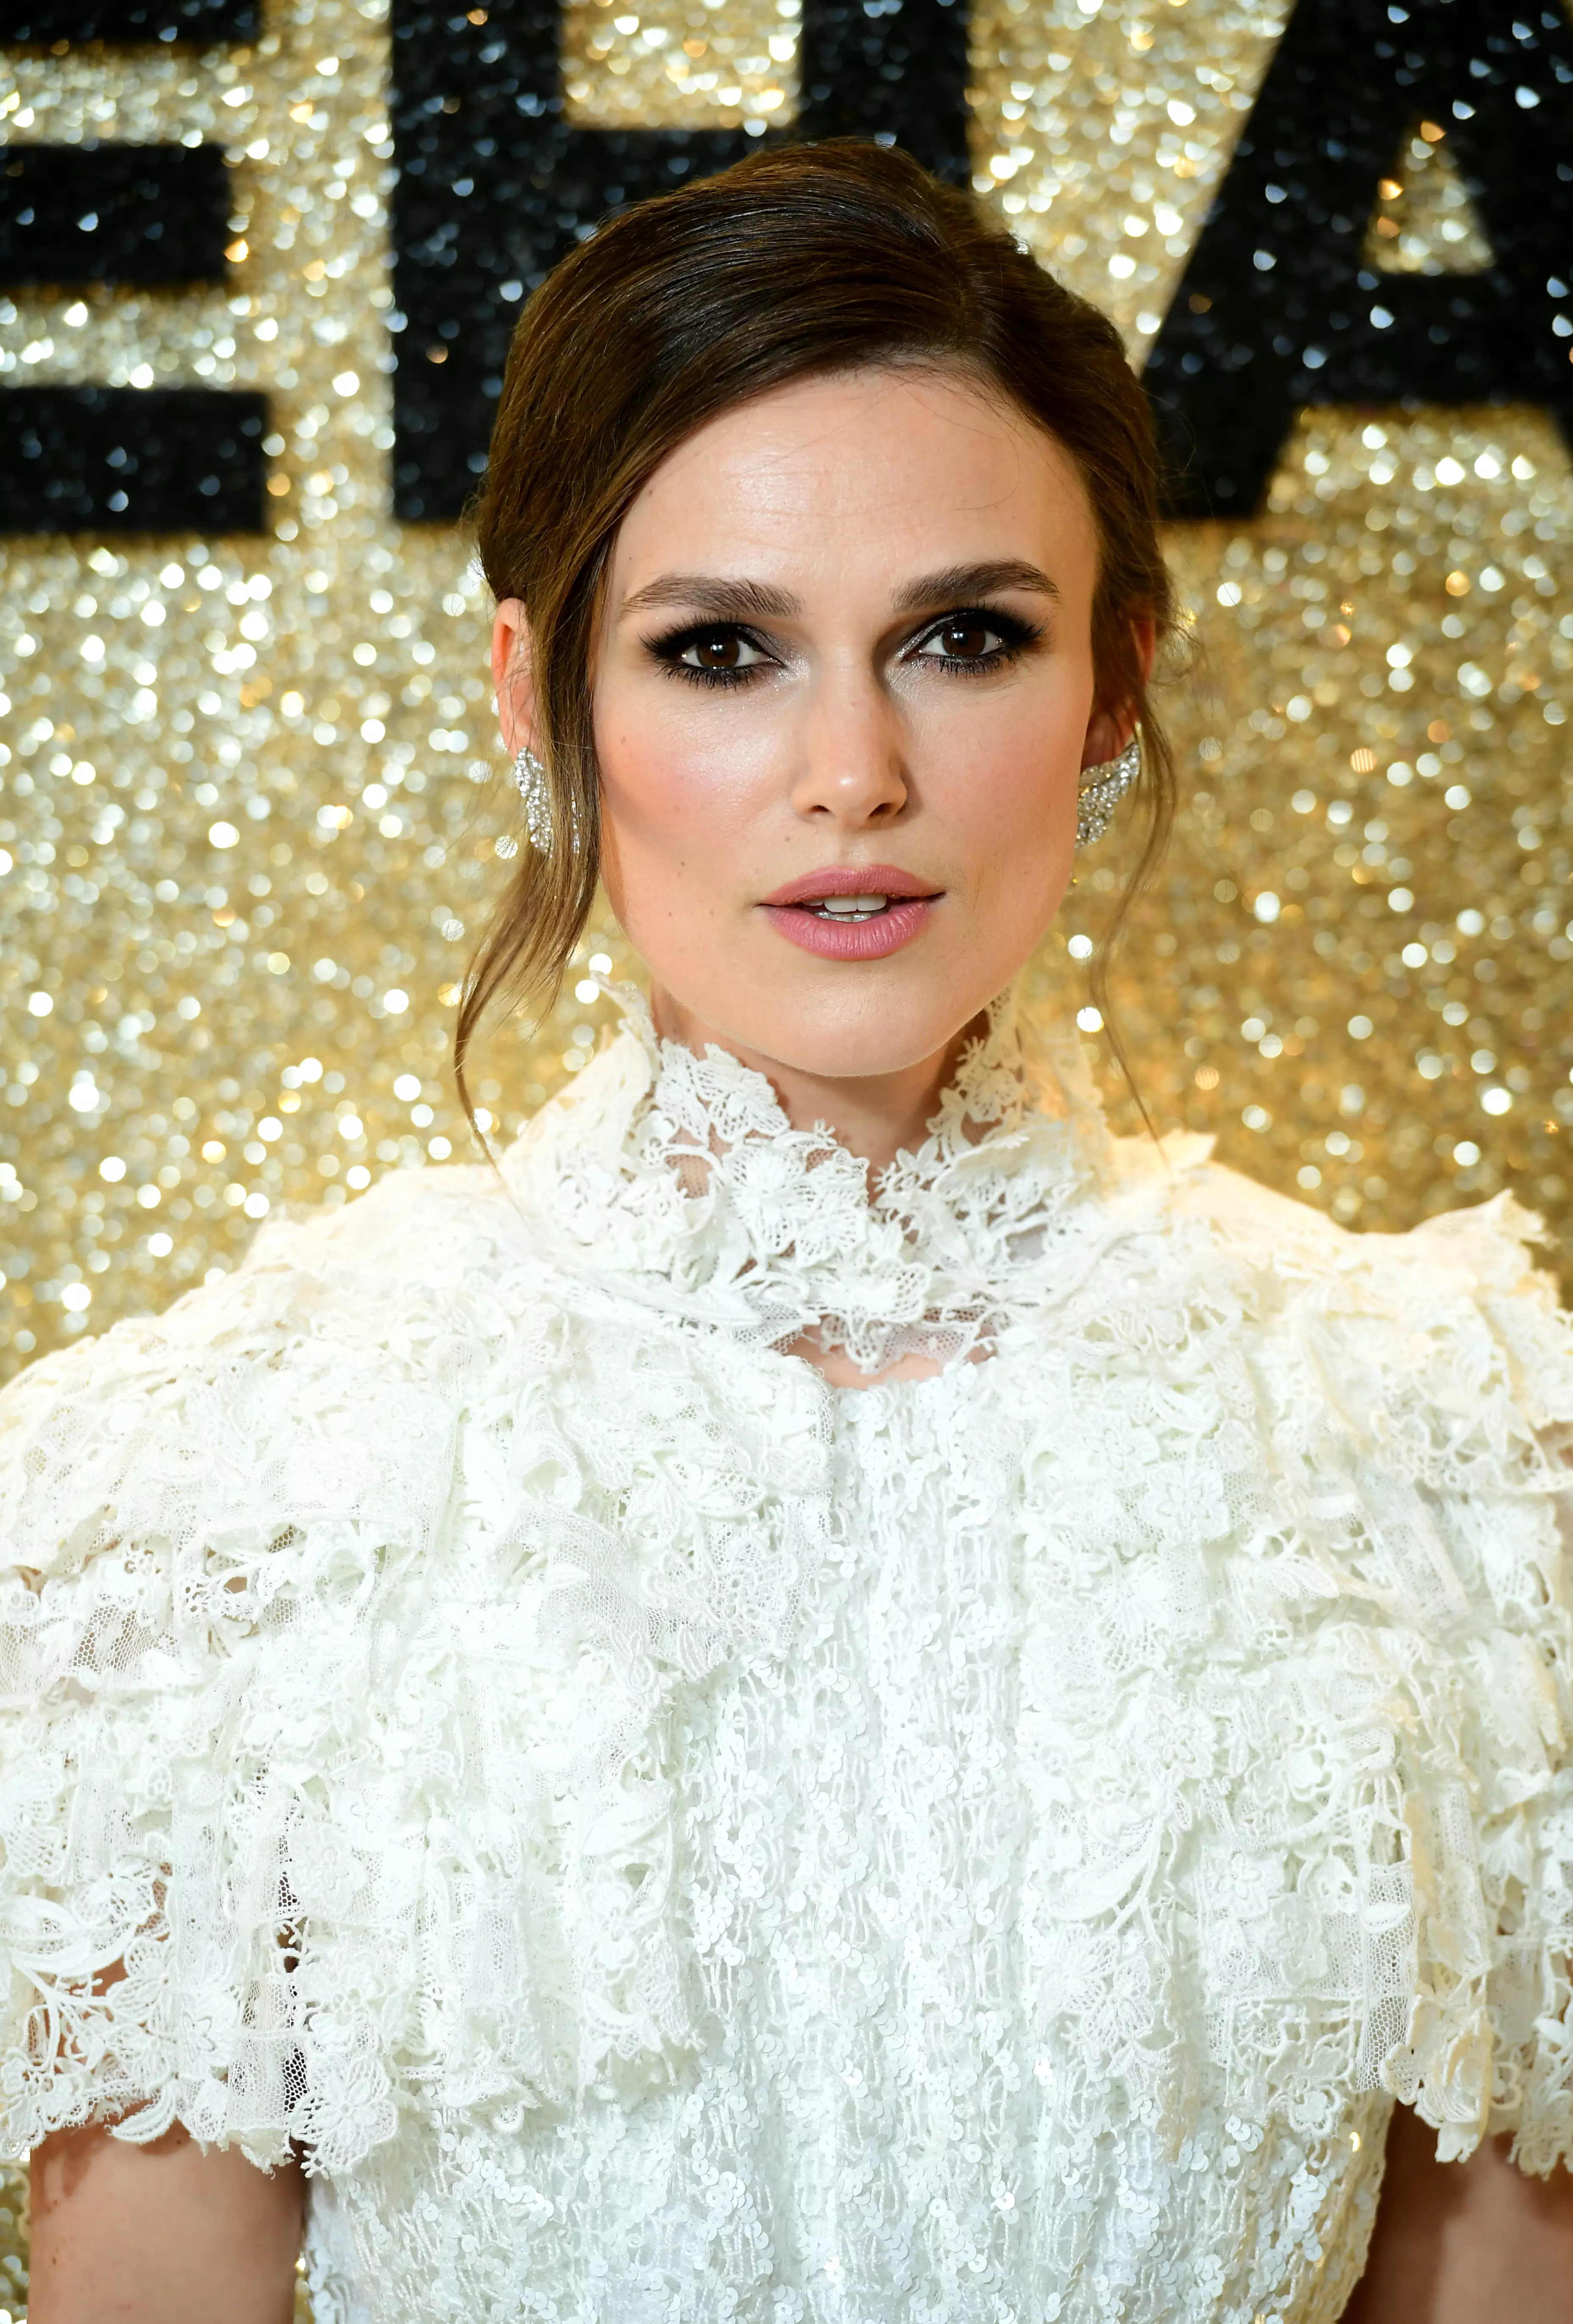 Keira Knightley will star as newly-widowed Cora in 'The Essex Serpent' (